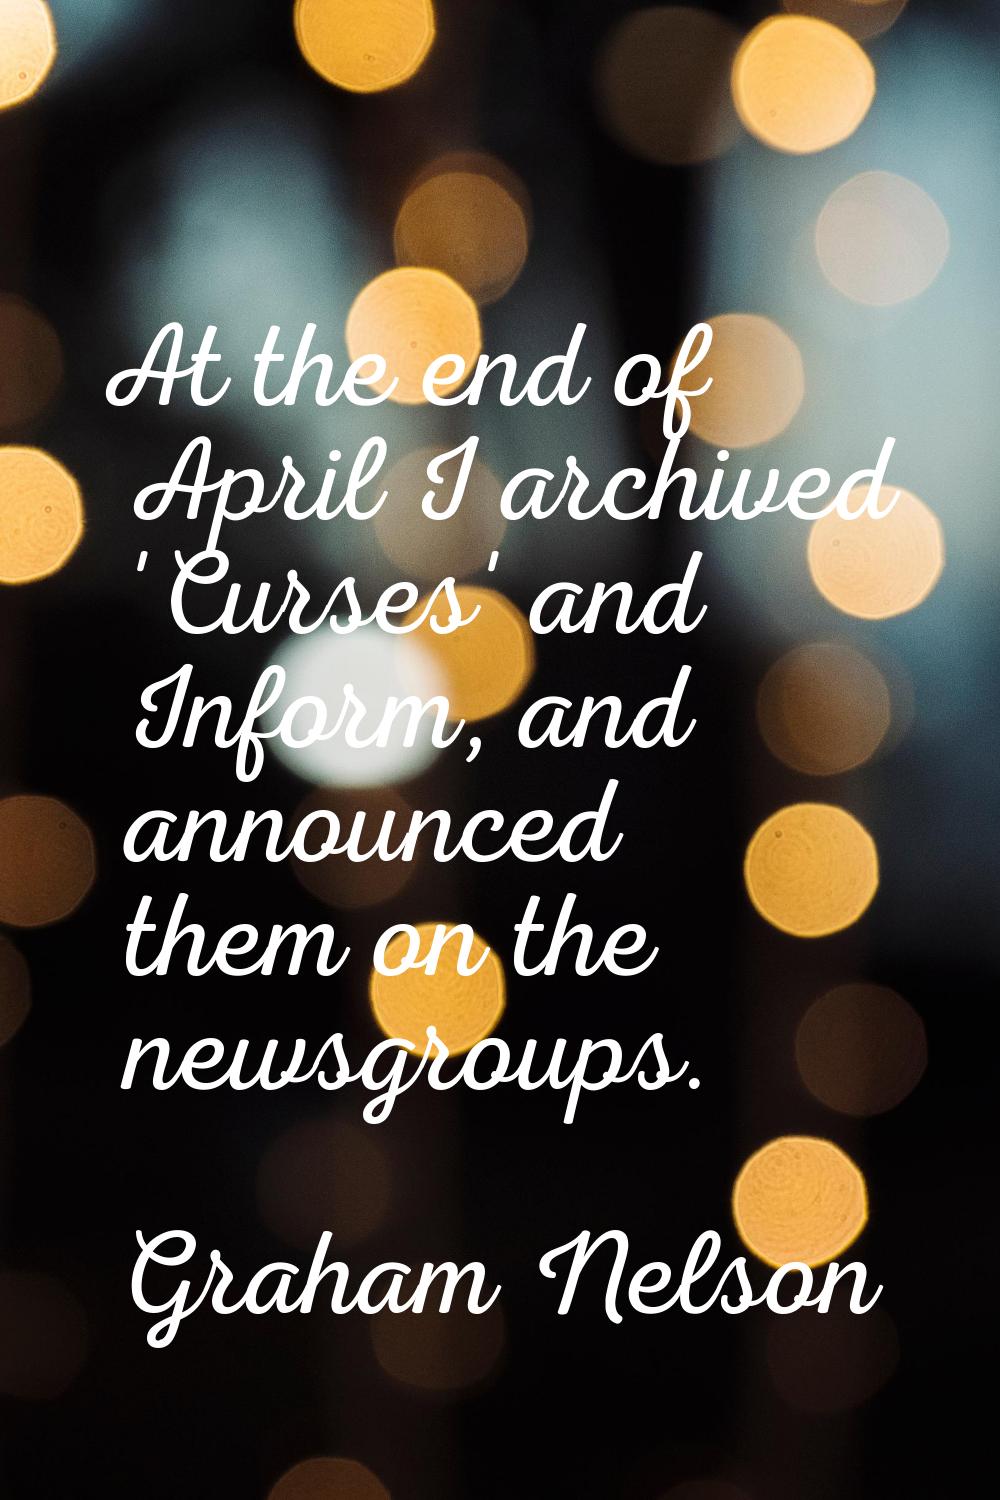 At the end of April I archived 'Curses' and Inform, and announced them on the newsgroups.